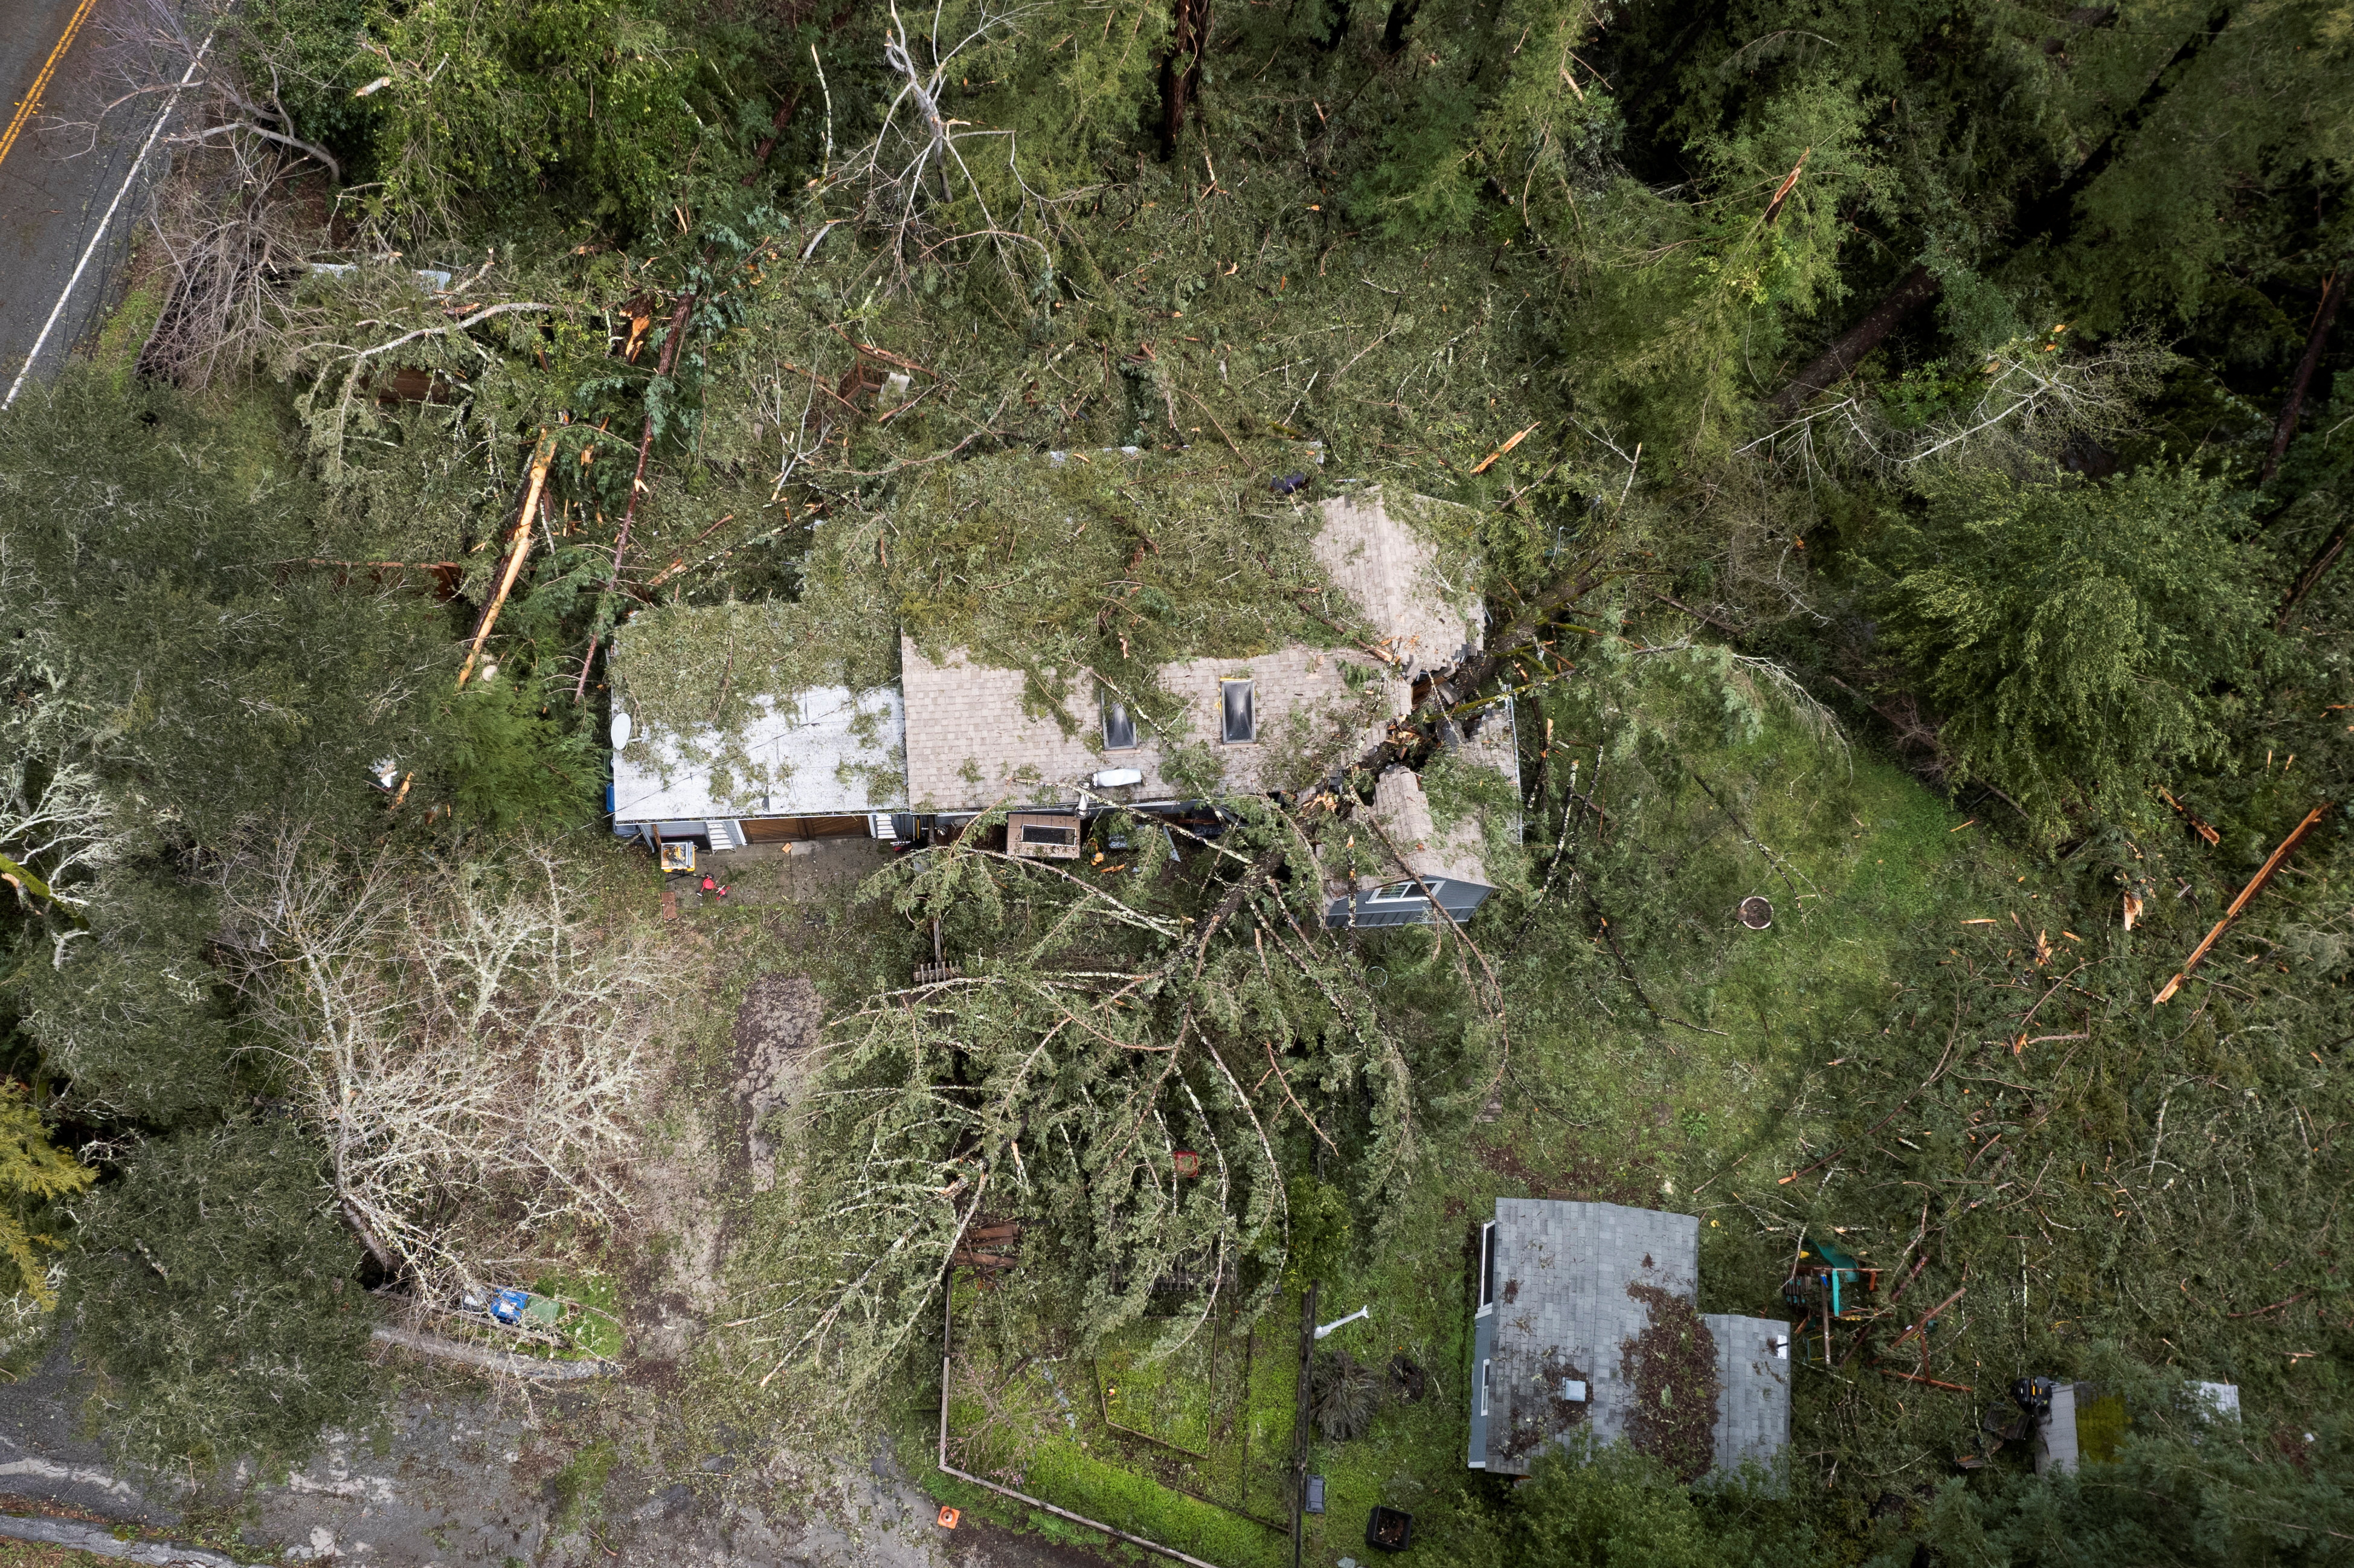 An aerial view of fallen trees after a severe windstorm in Boulder Creek, California